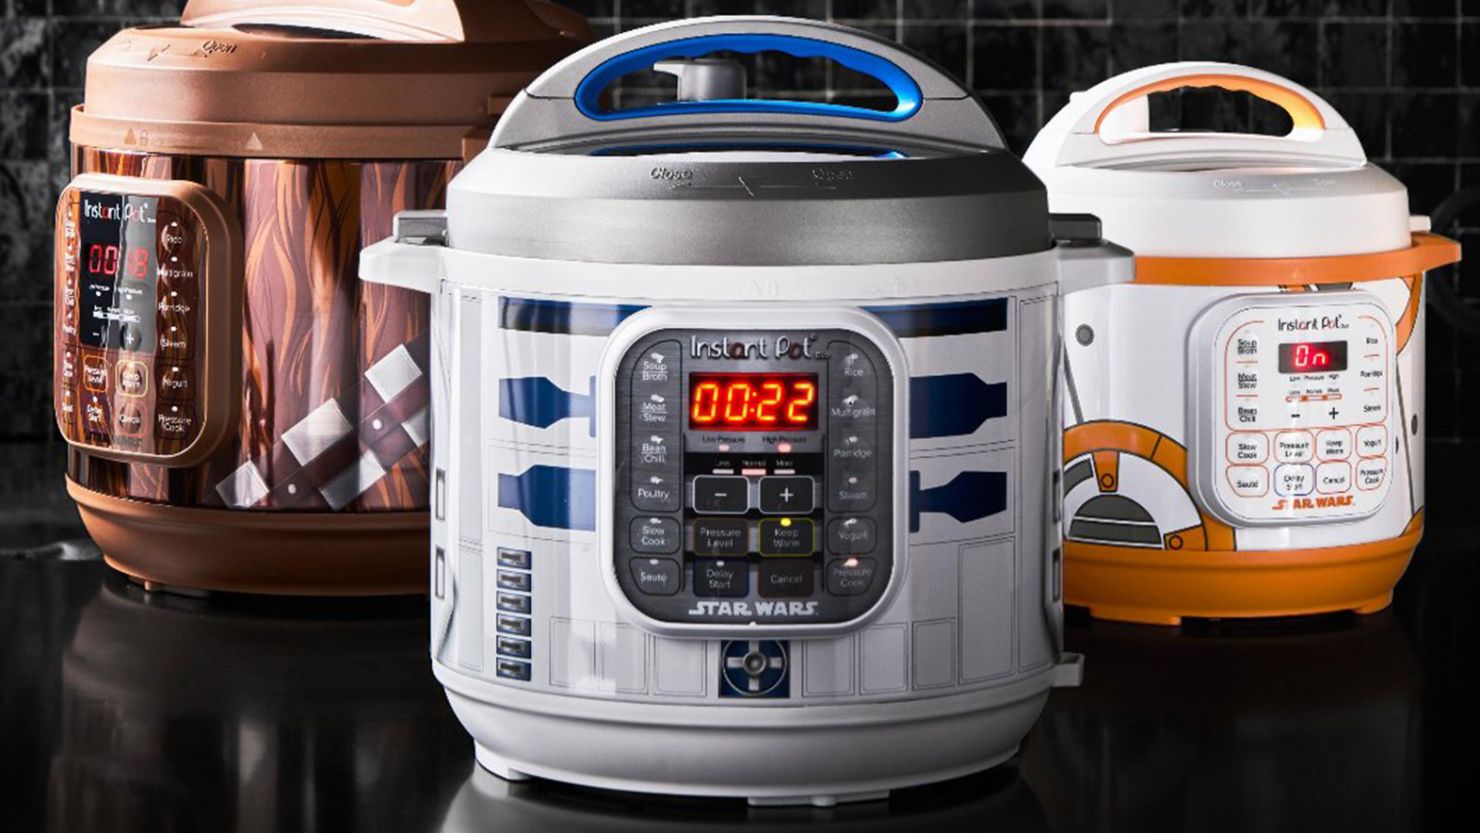 You Can Grab a Star Wars Instant Pot for 30% Off Until Midnight Tonight